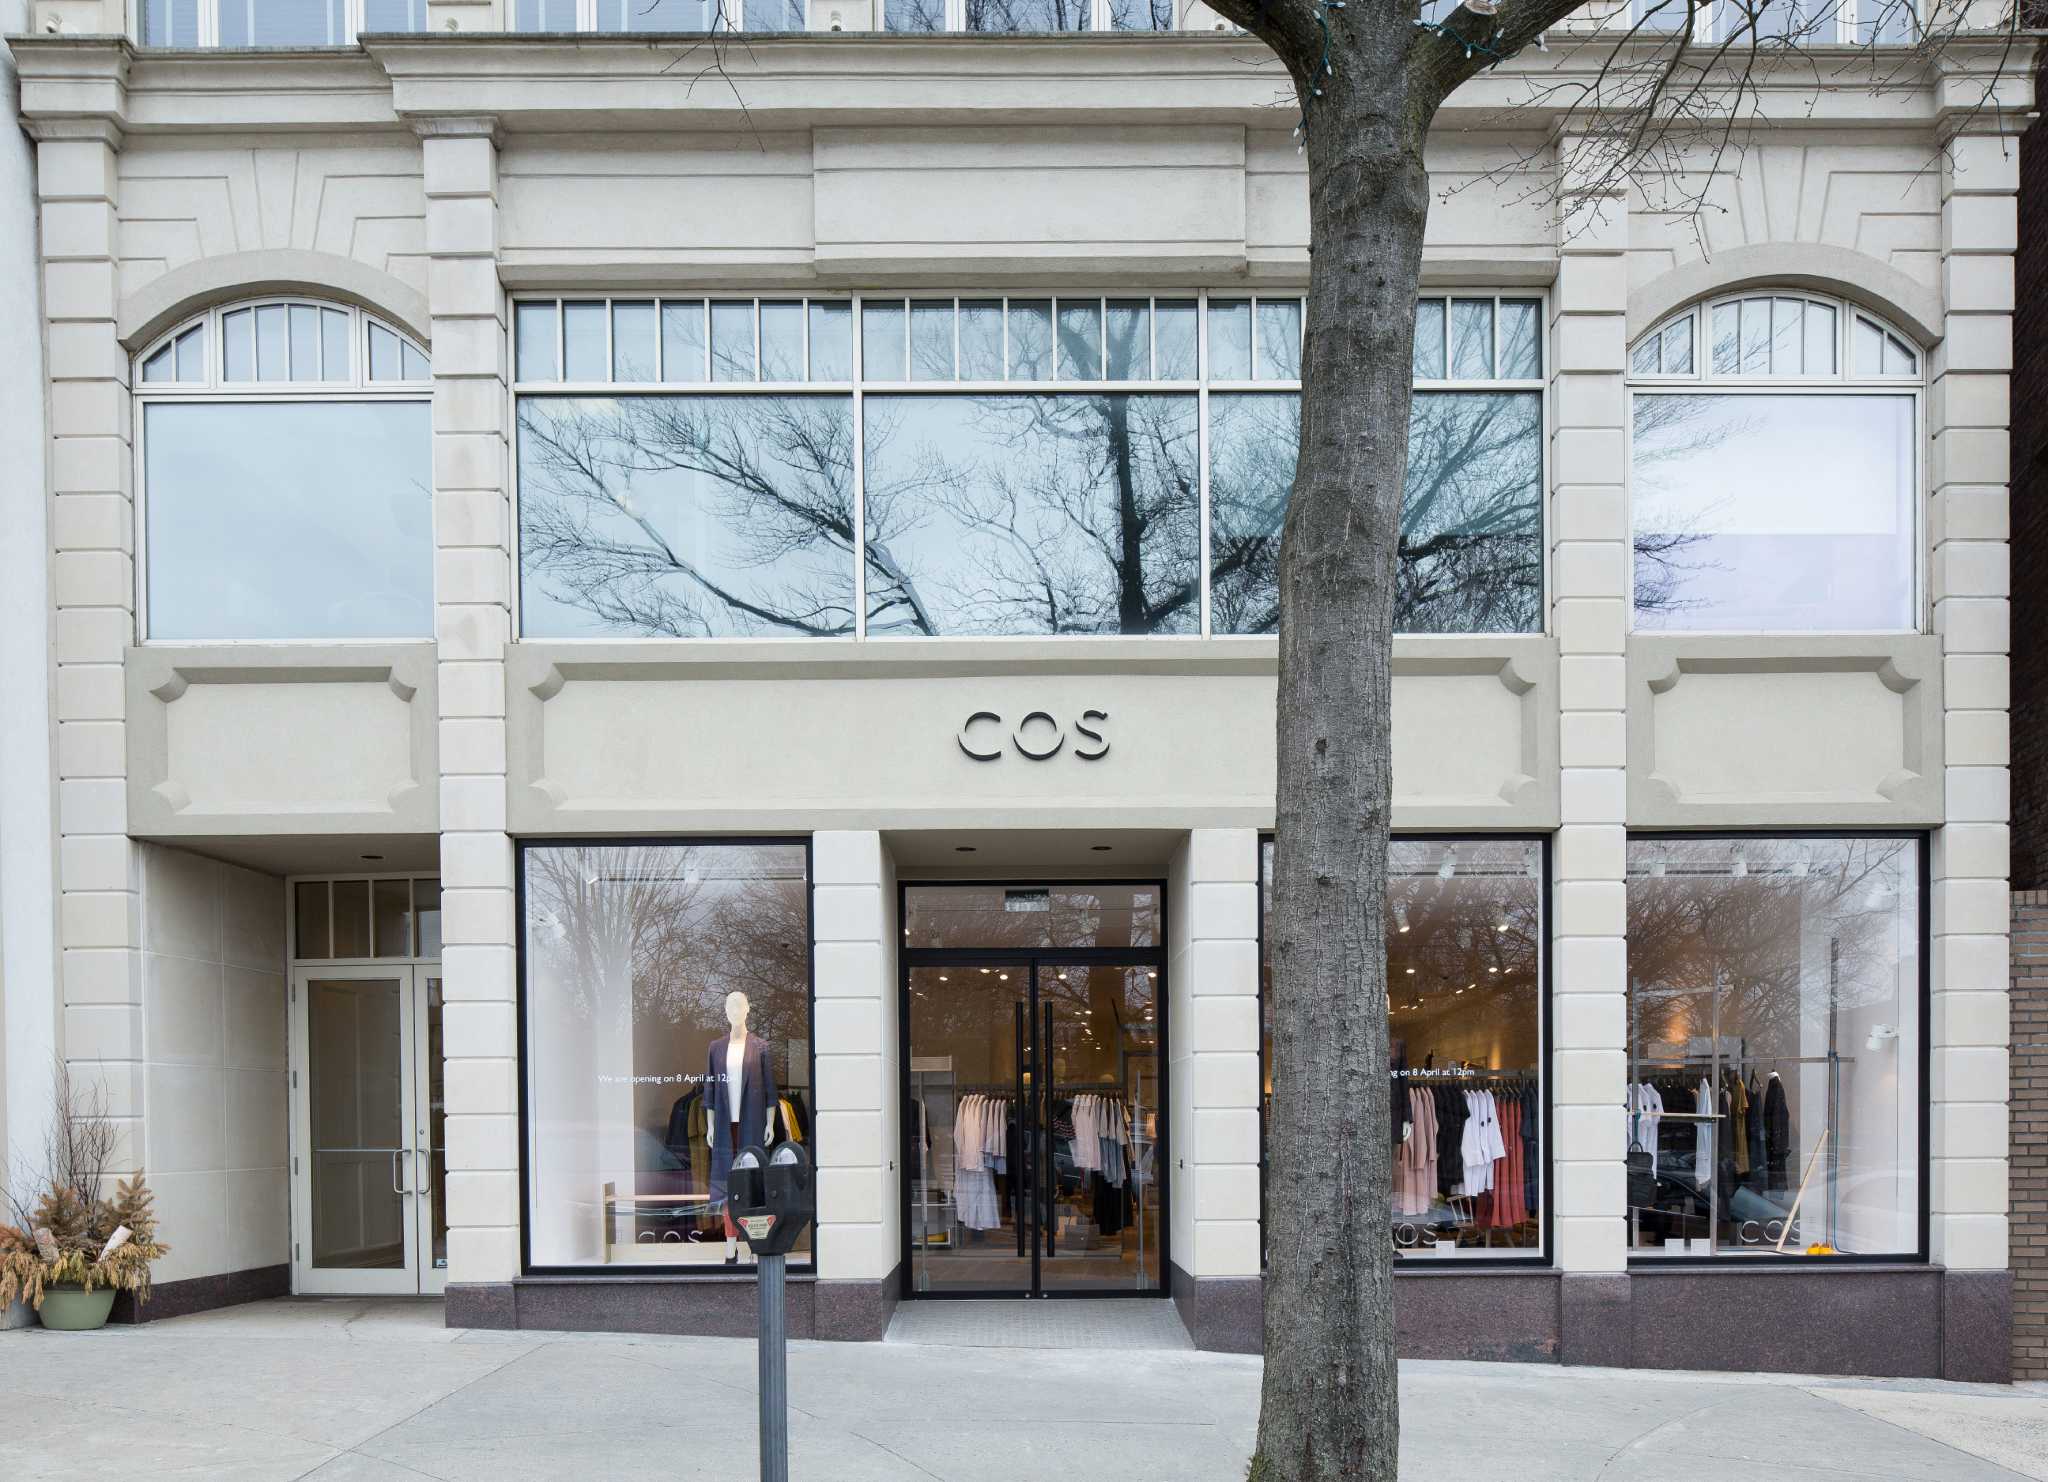 COS boutique opens in Greenwich